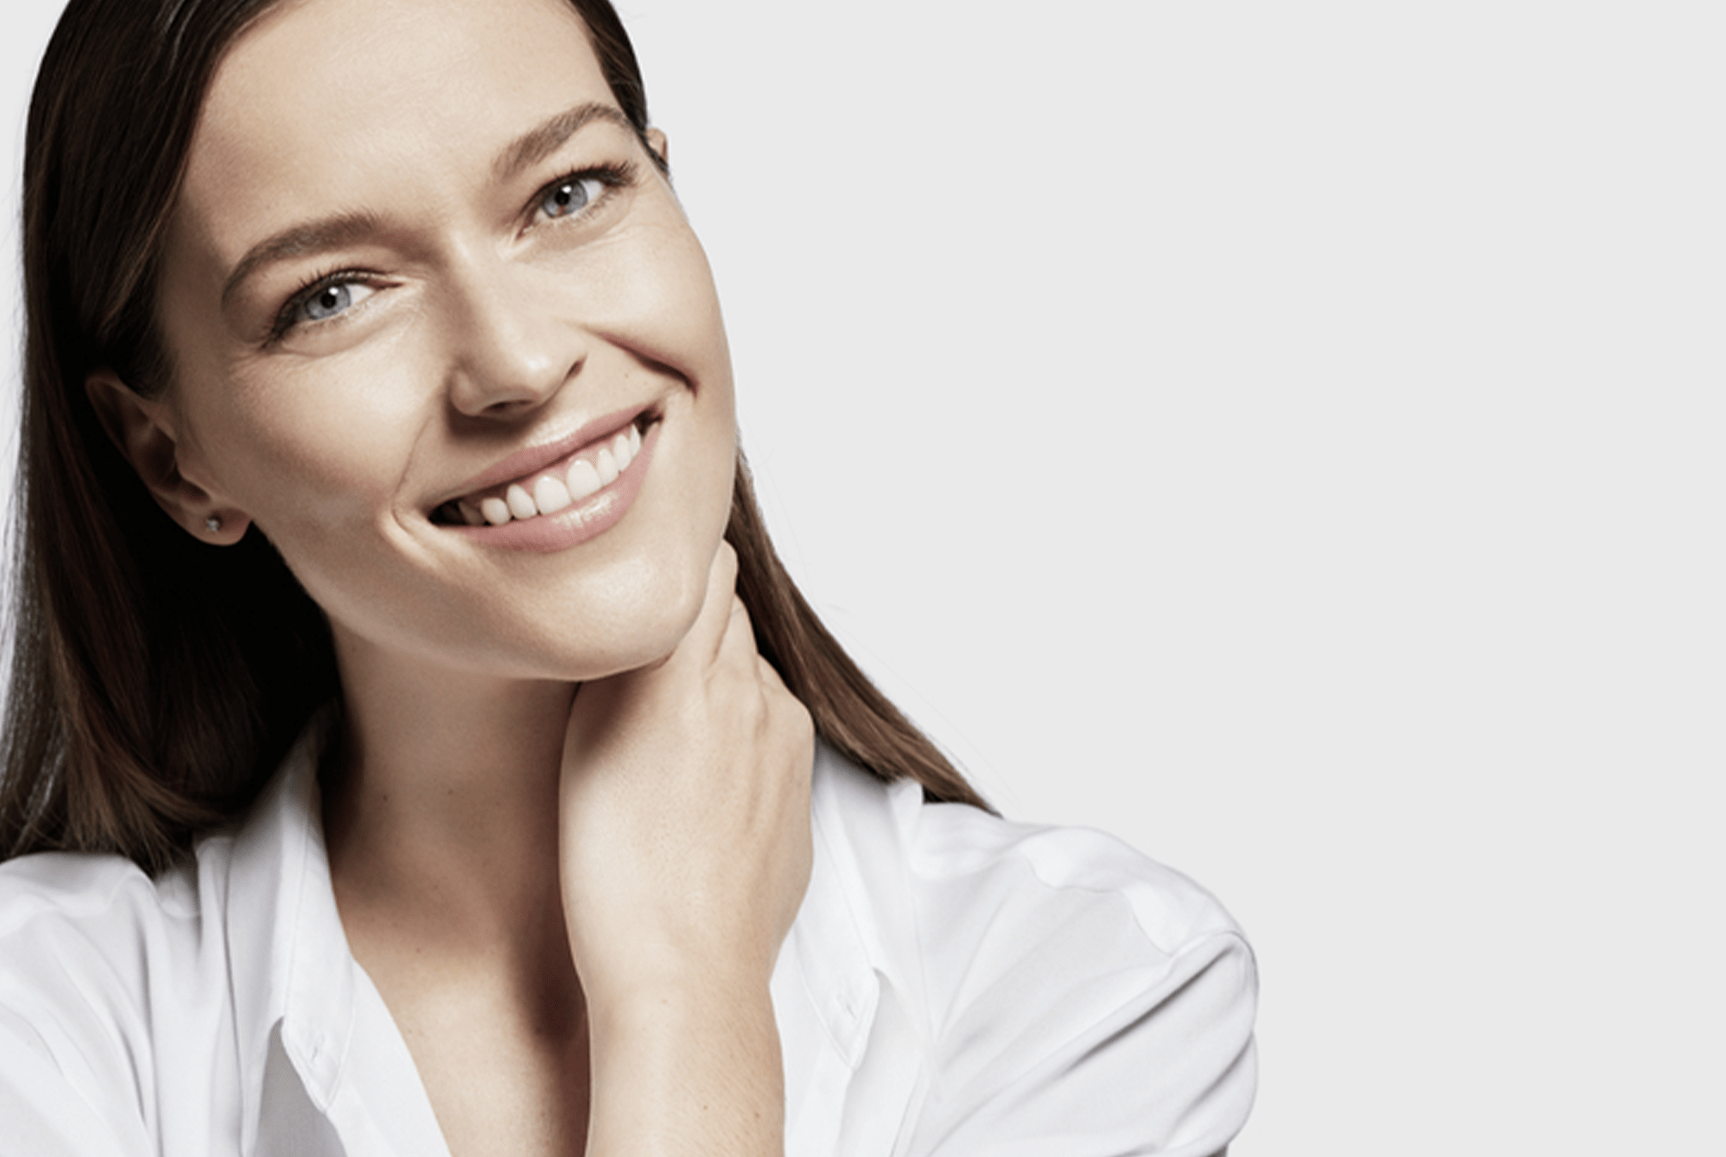 Woman smiling with visible nasolabial folds